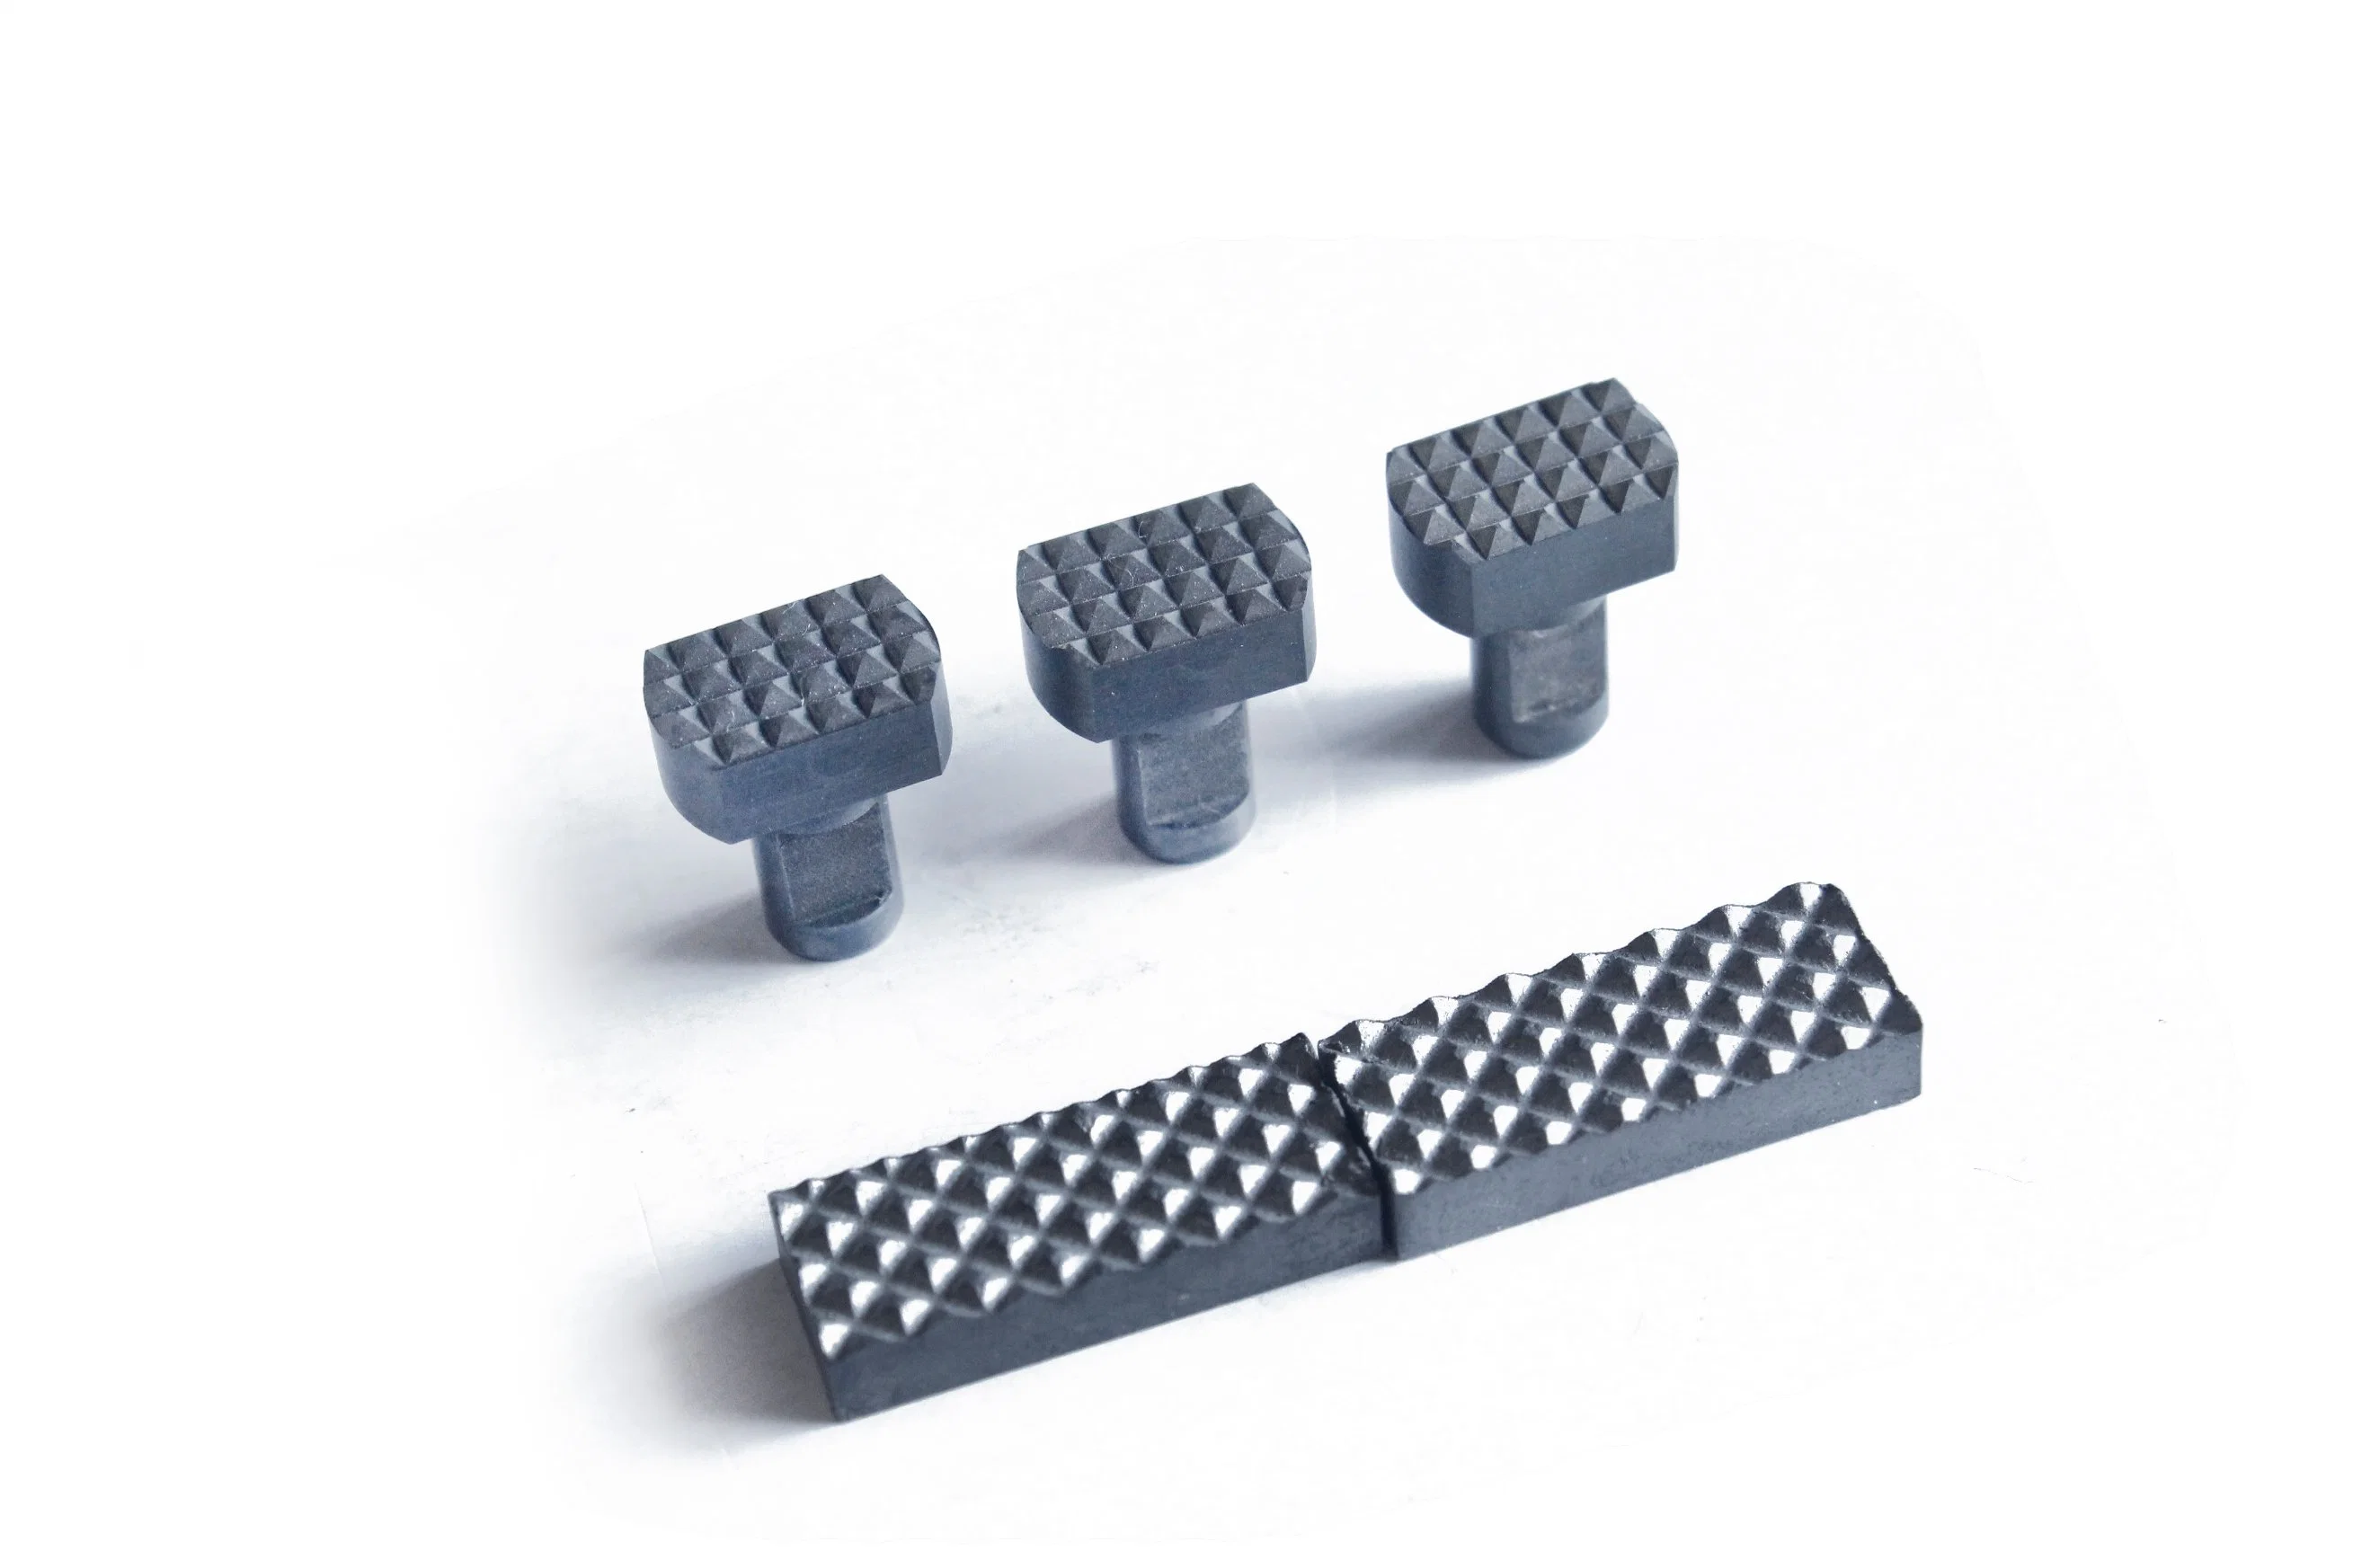 OEM Customized Cemented Tungsten Carbide Gripper Inserts Are Welded Into The Steel Jaws as Chuck Jaw for Gripping Drill Rods Used in Diamond Drilling Industry